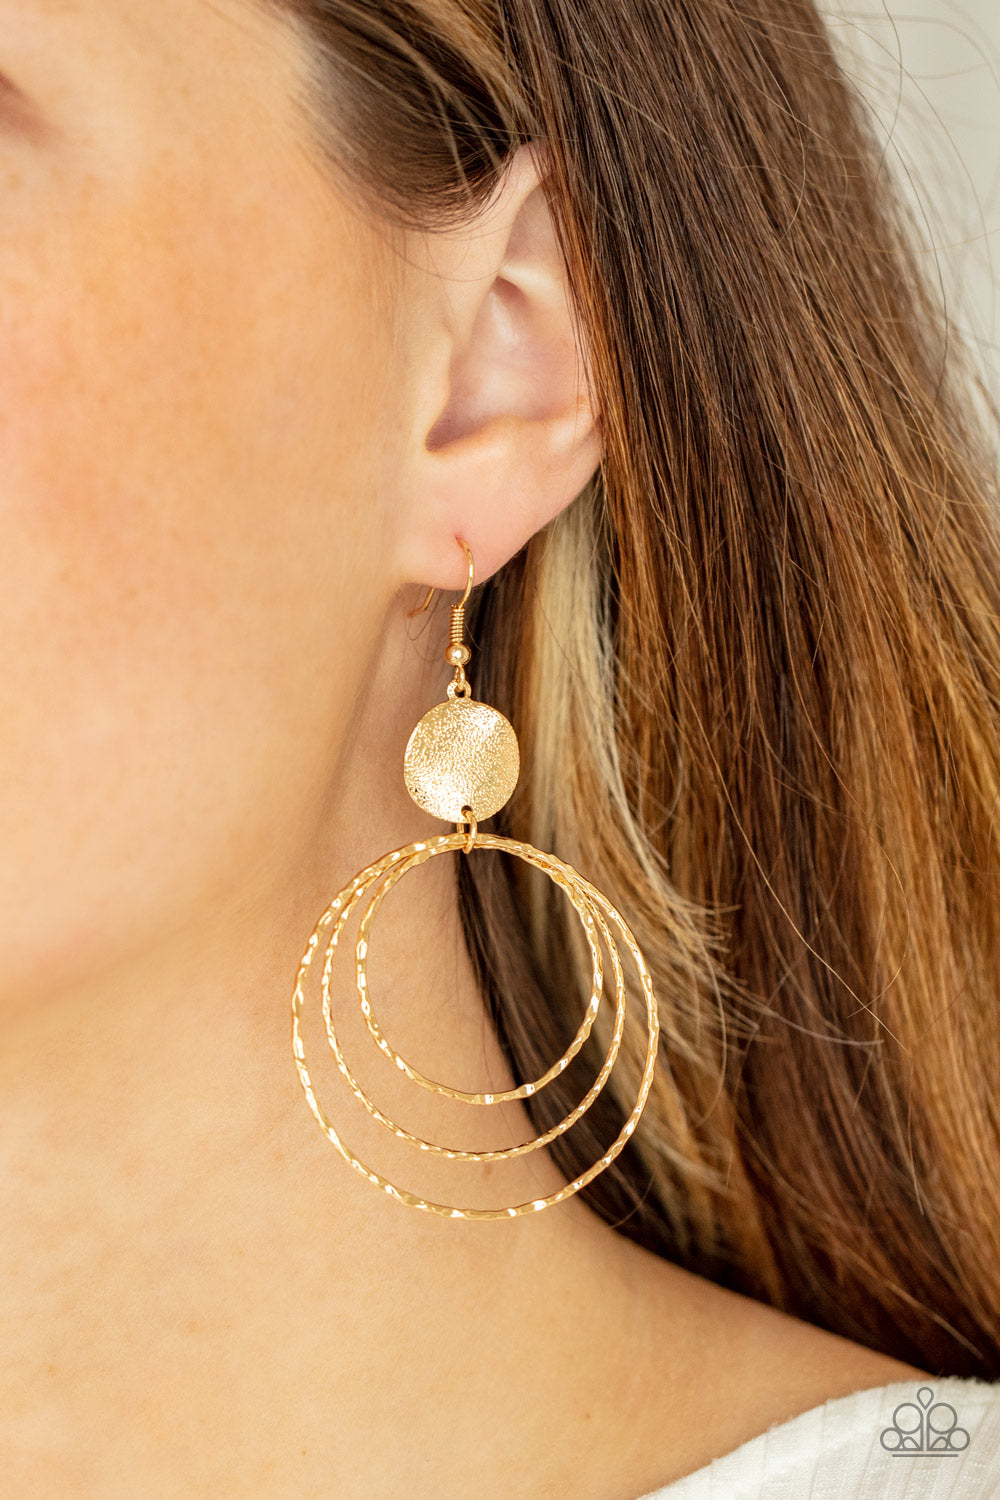 Universal Rehearsal Gold Earring - Paparazzi Accessories  A shimmery wavy gold disc links atop a collection of three delicately hammered gold rings in concentric sizes for an out-of-this-world finish. Earring attaches to a standard fishhook fitting.  All Paparazzi Accessories are lead free and nickel free!  Sold as one pair of earrings.